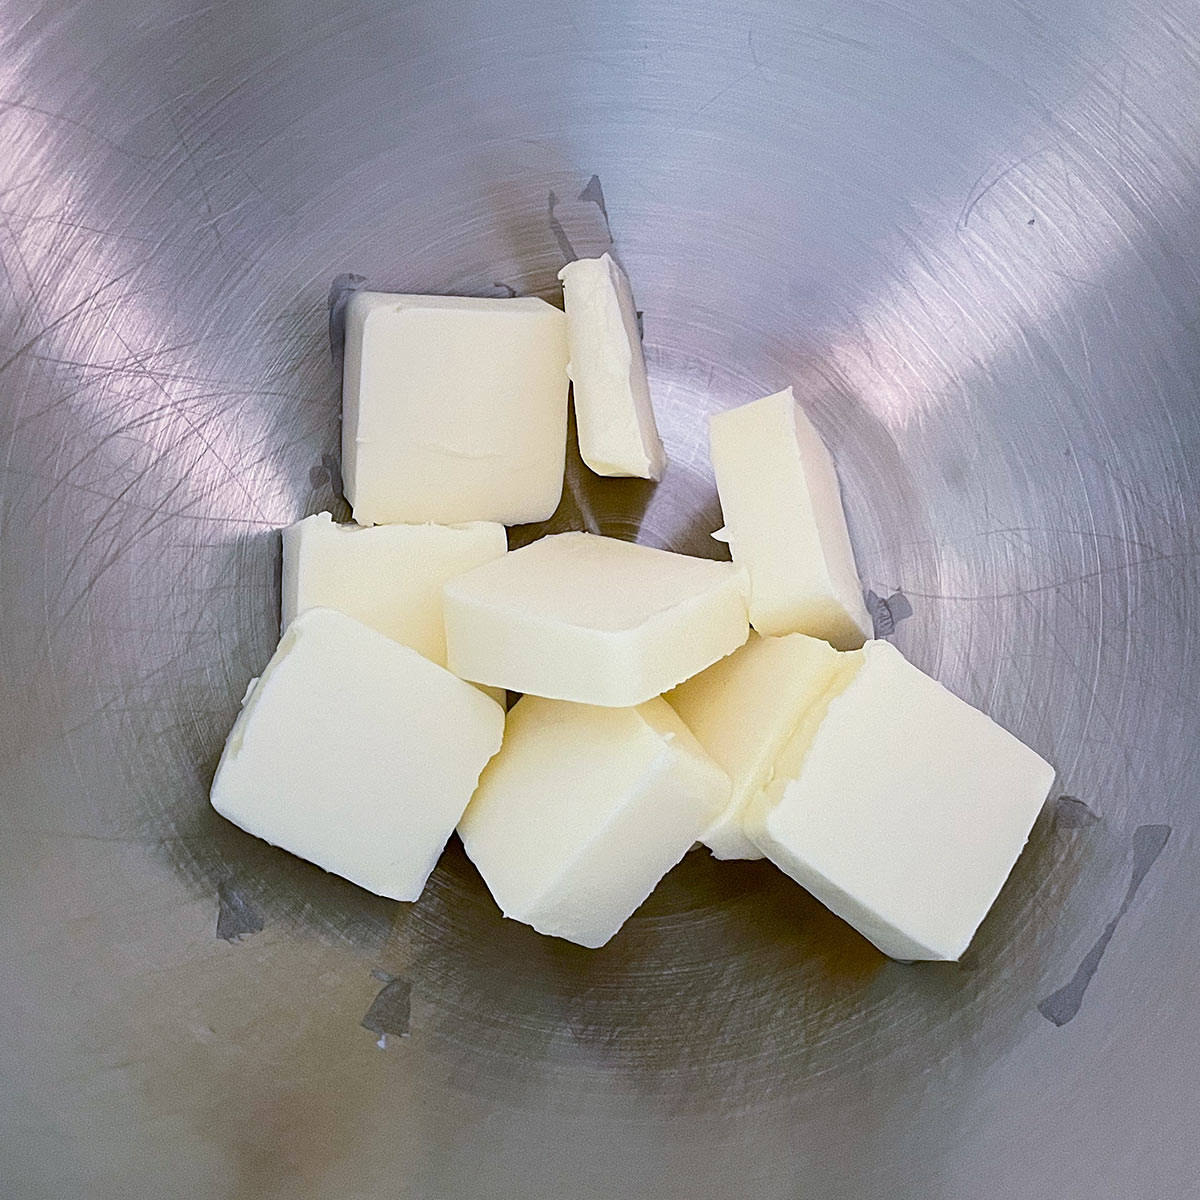 Unsalted butter that is cubed and in a mixer bowl.